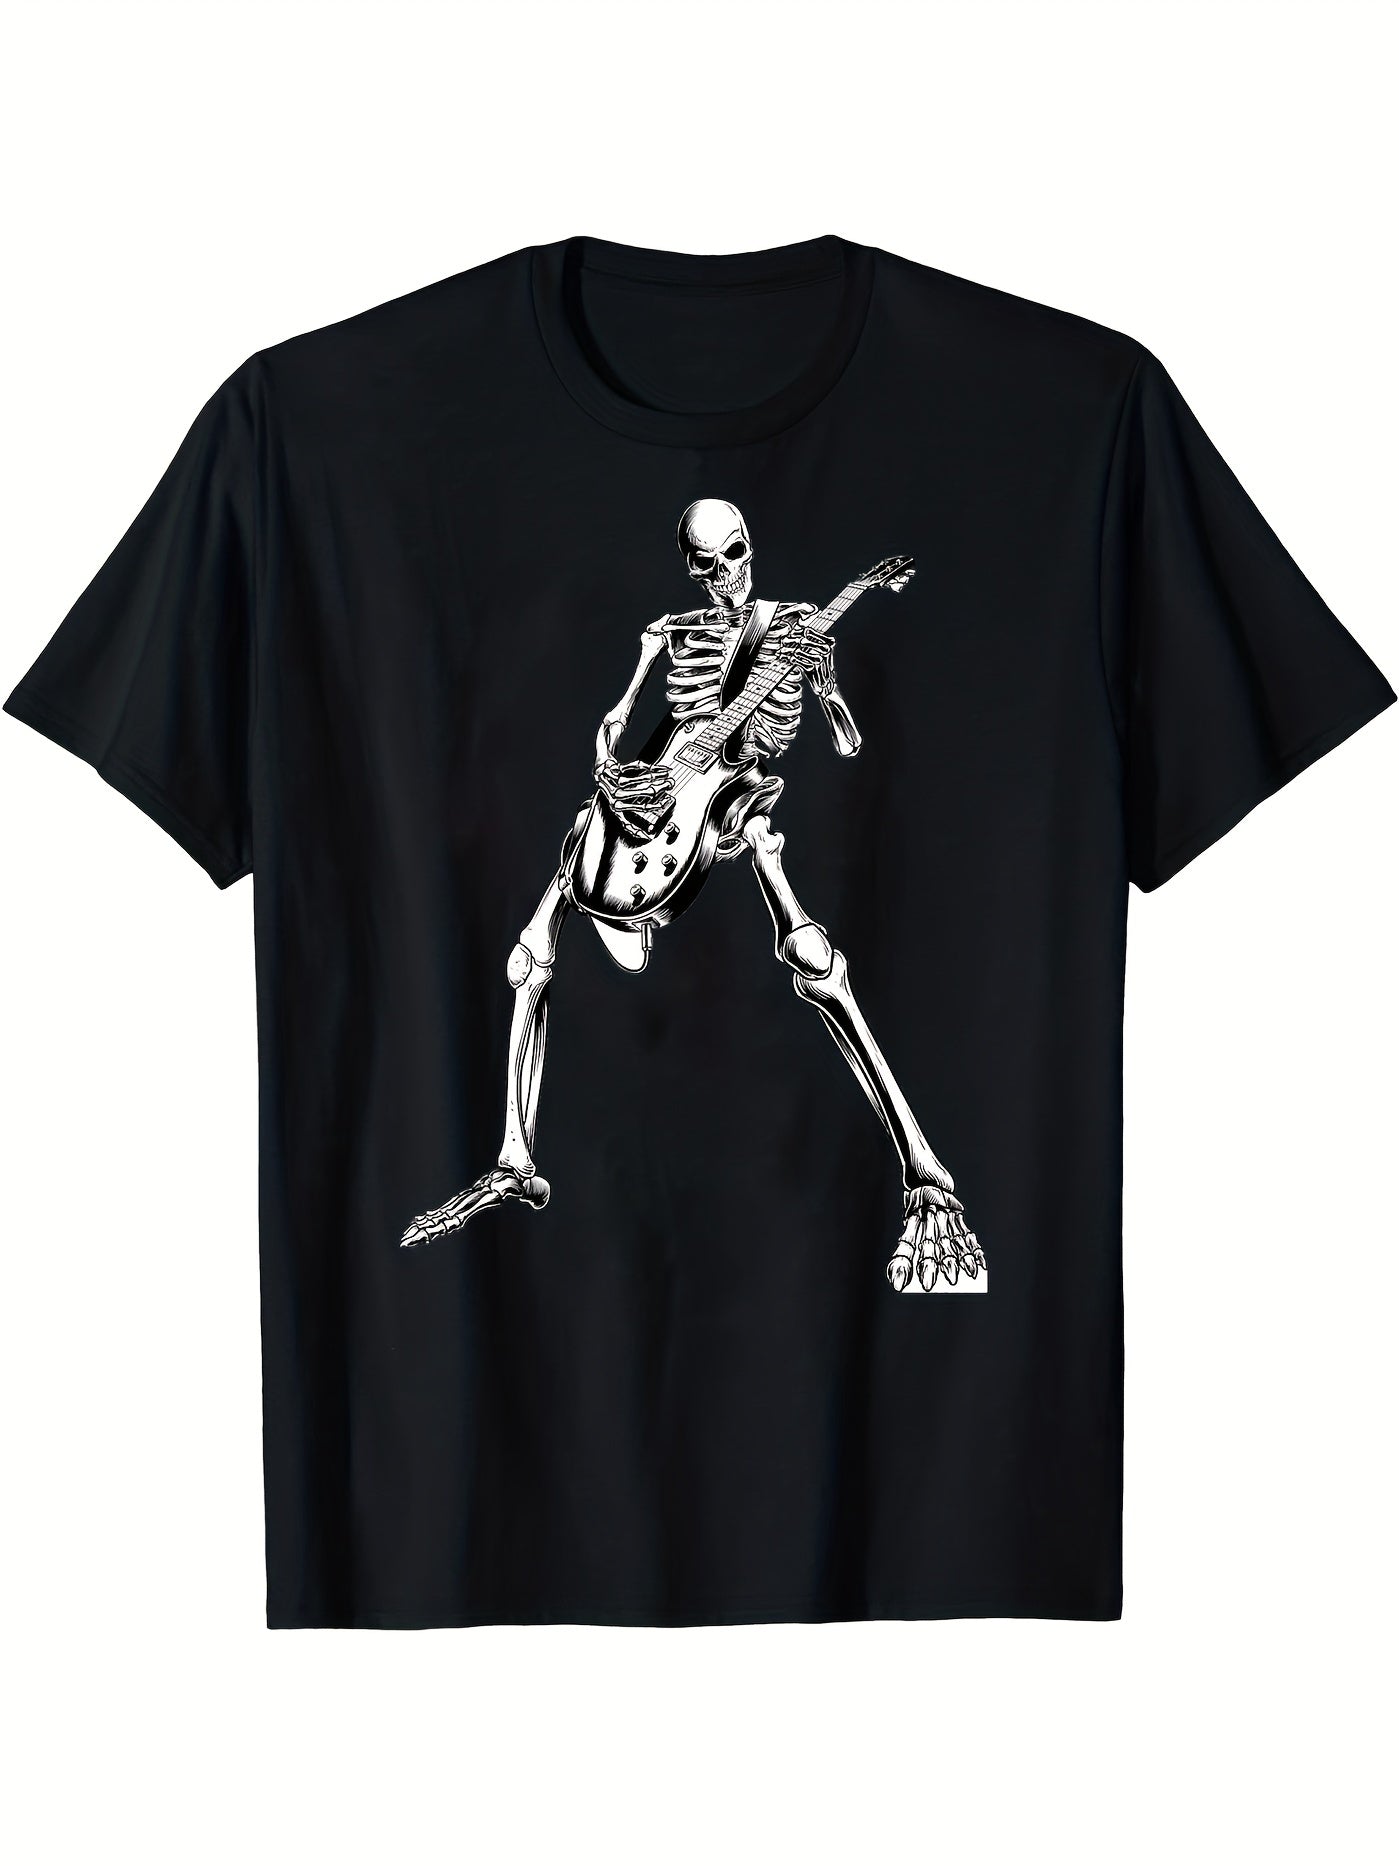 Happy Skeleton Guitar Guy Men's Casual Short Sleeve Crew Neck T-Shirt Men's Tee Outfits Summer Clothing